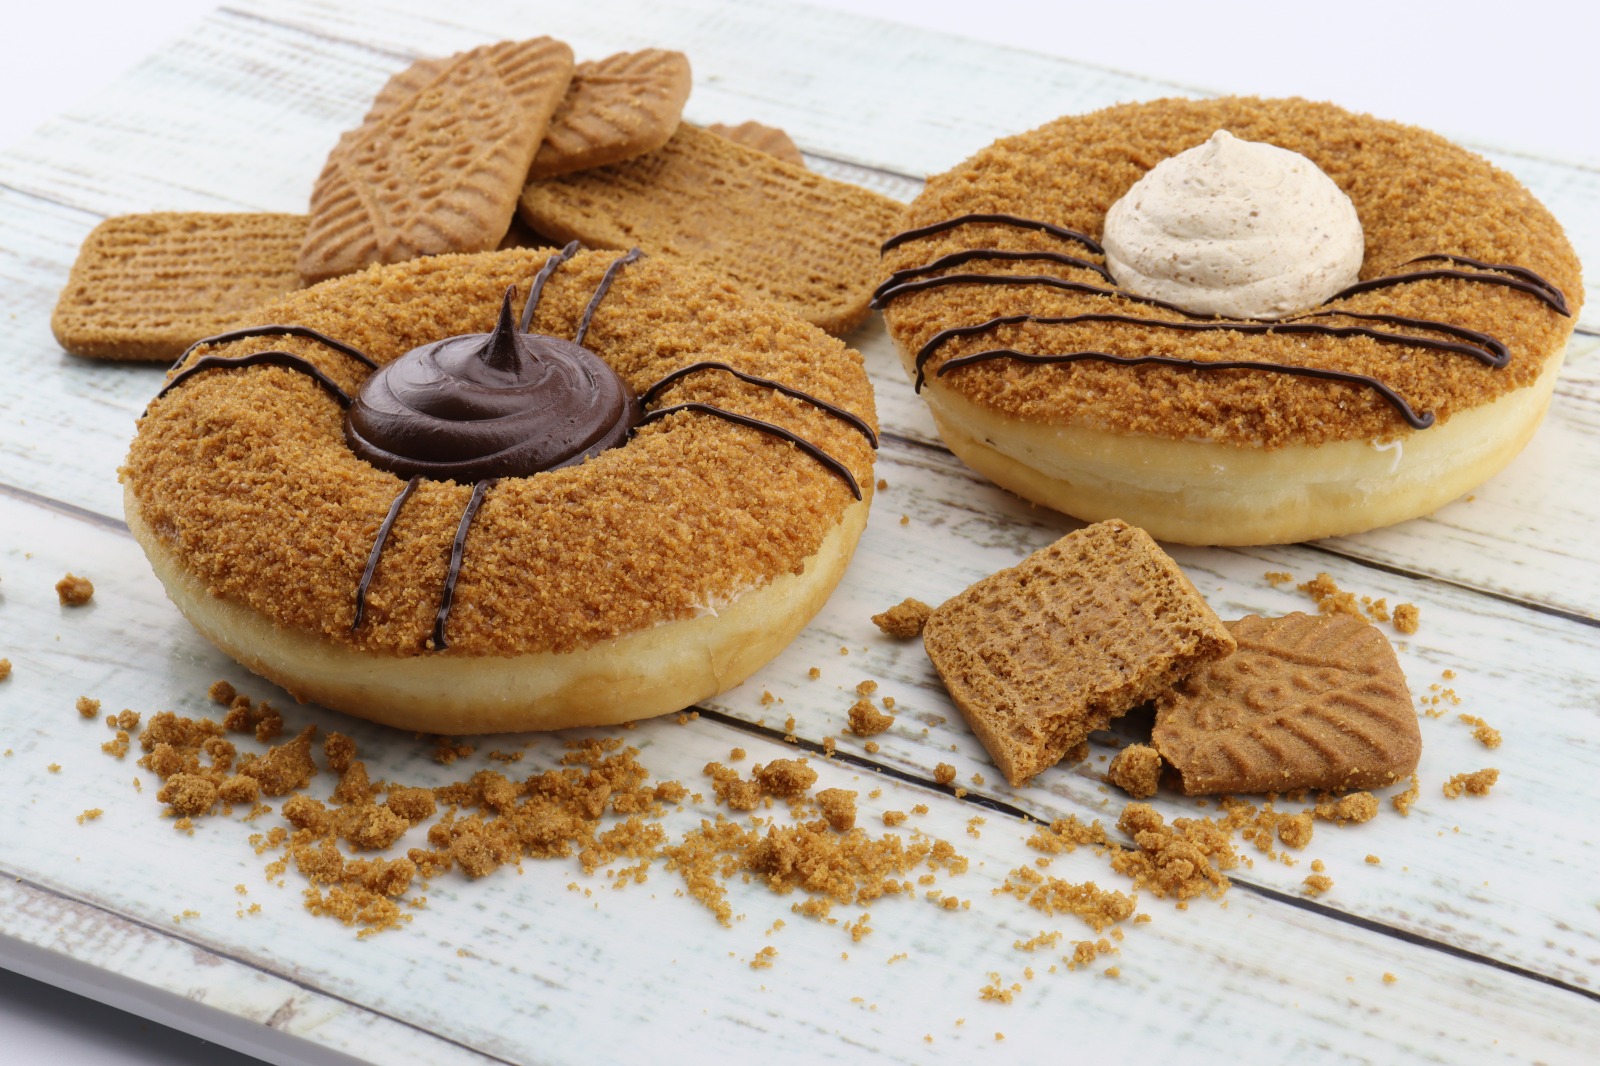 Introducing Double Caramel Biscuit Donuts and Choco Caramel Biscuit Donuts: A Sweet Treat That Everyone Loves